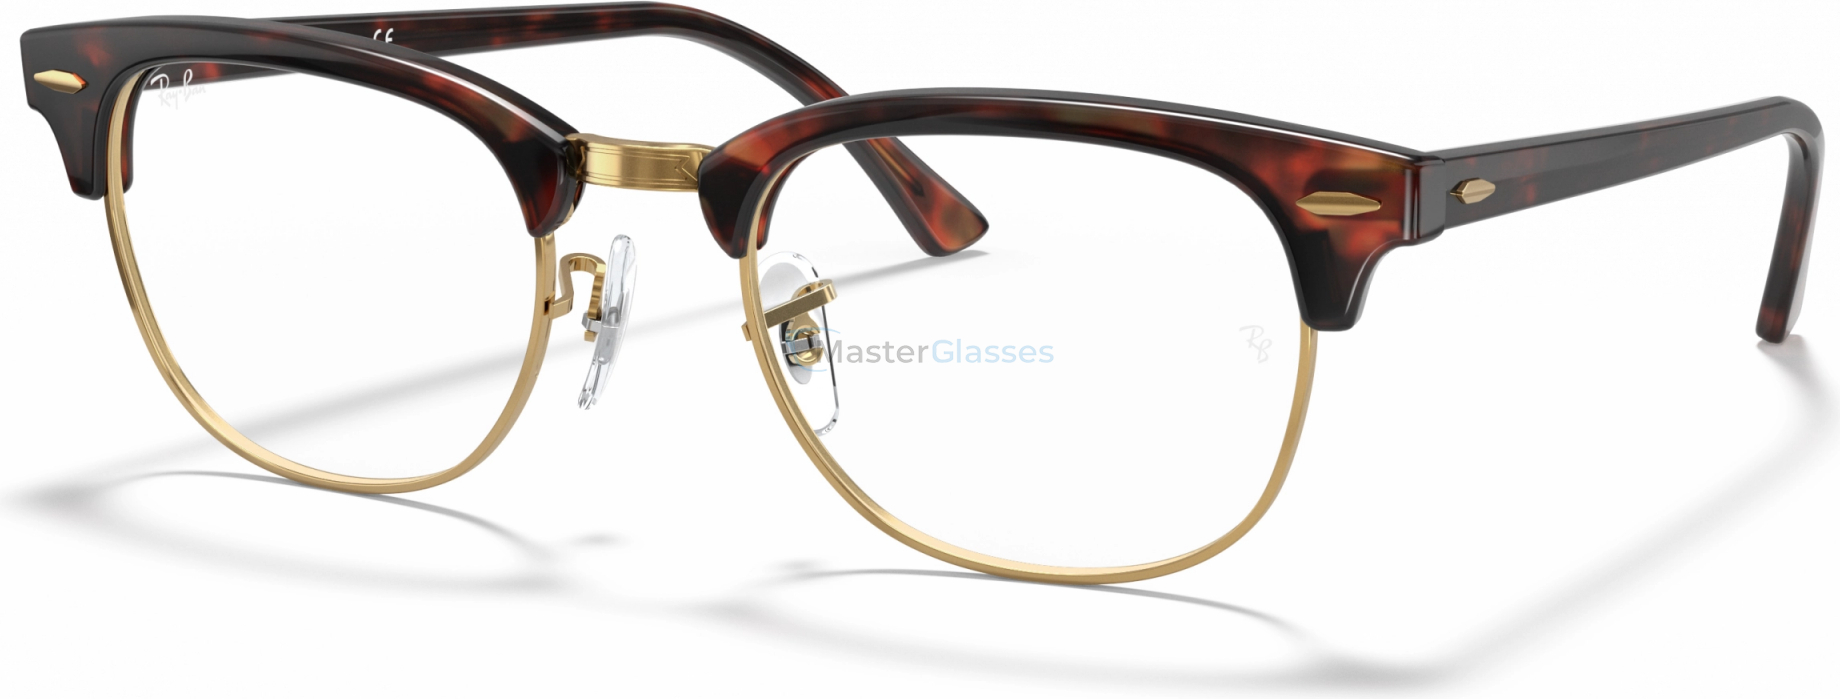  Ray-Ban Clubmaster RX5154 8058 Mock Tortoise